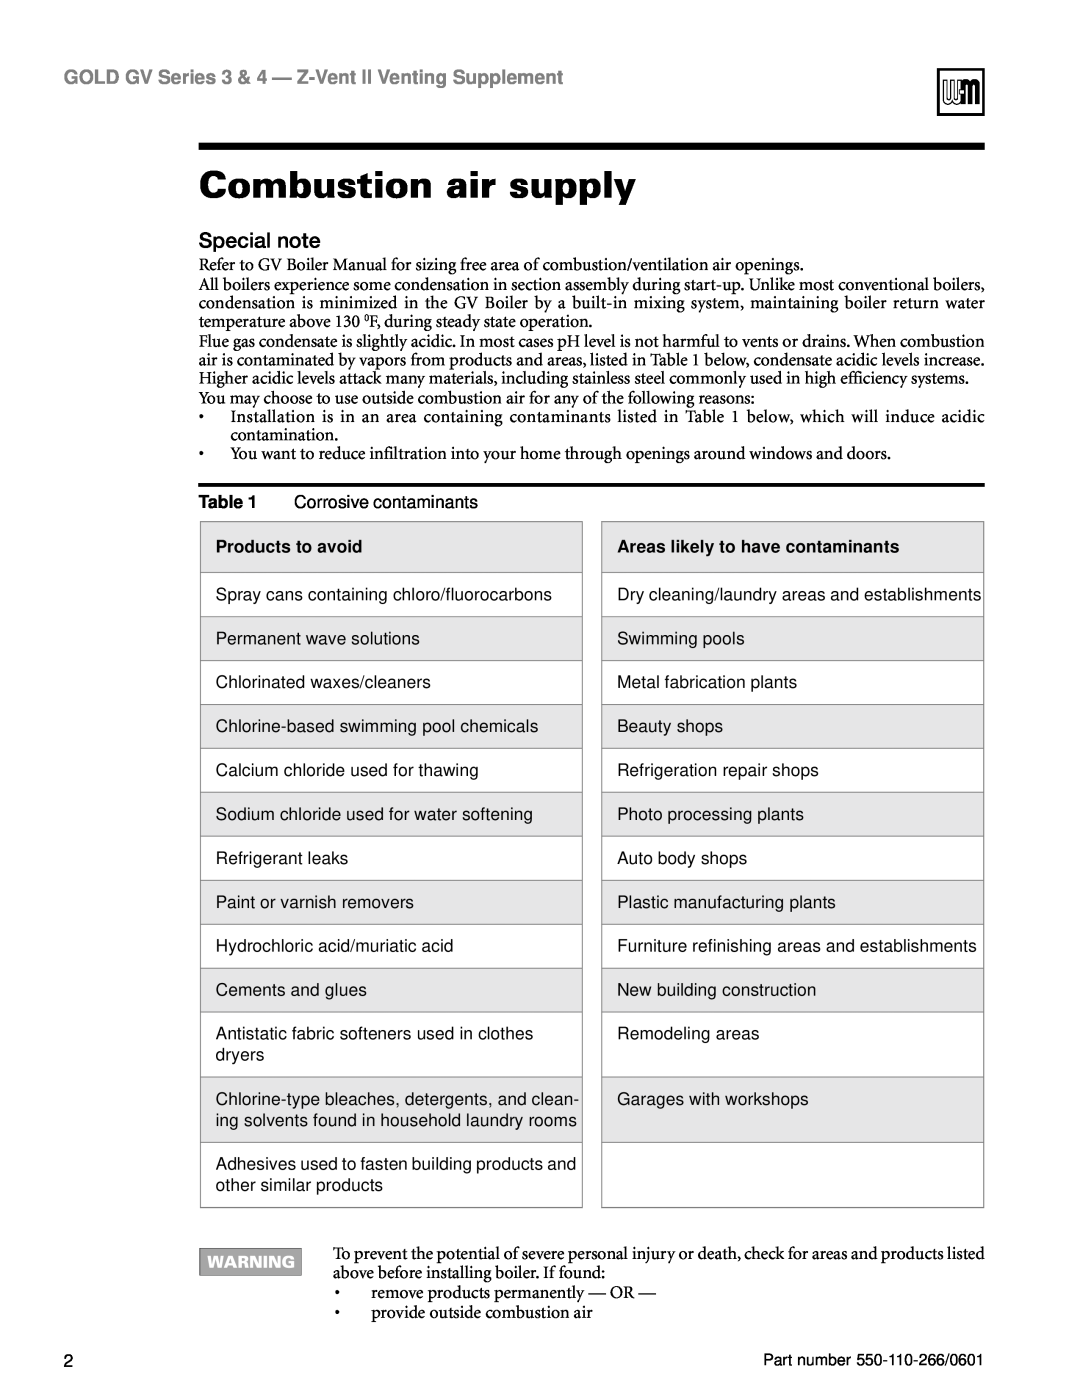 Weil-McLain GV Series 3 manual Combustion air supply, Special note, Products to avoid, Areas likely to have contaminants 